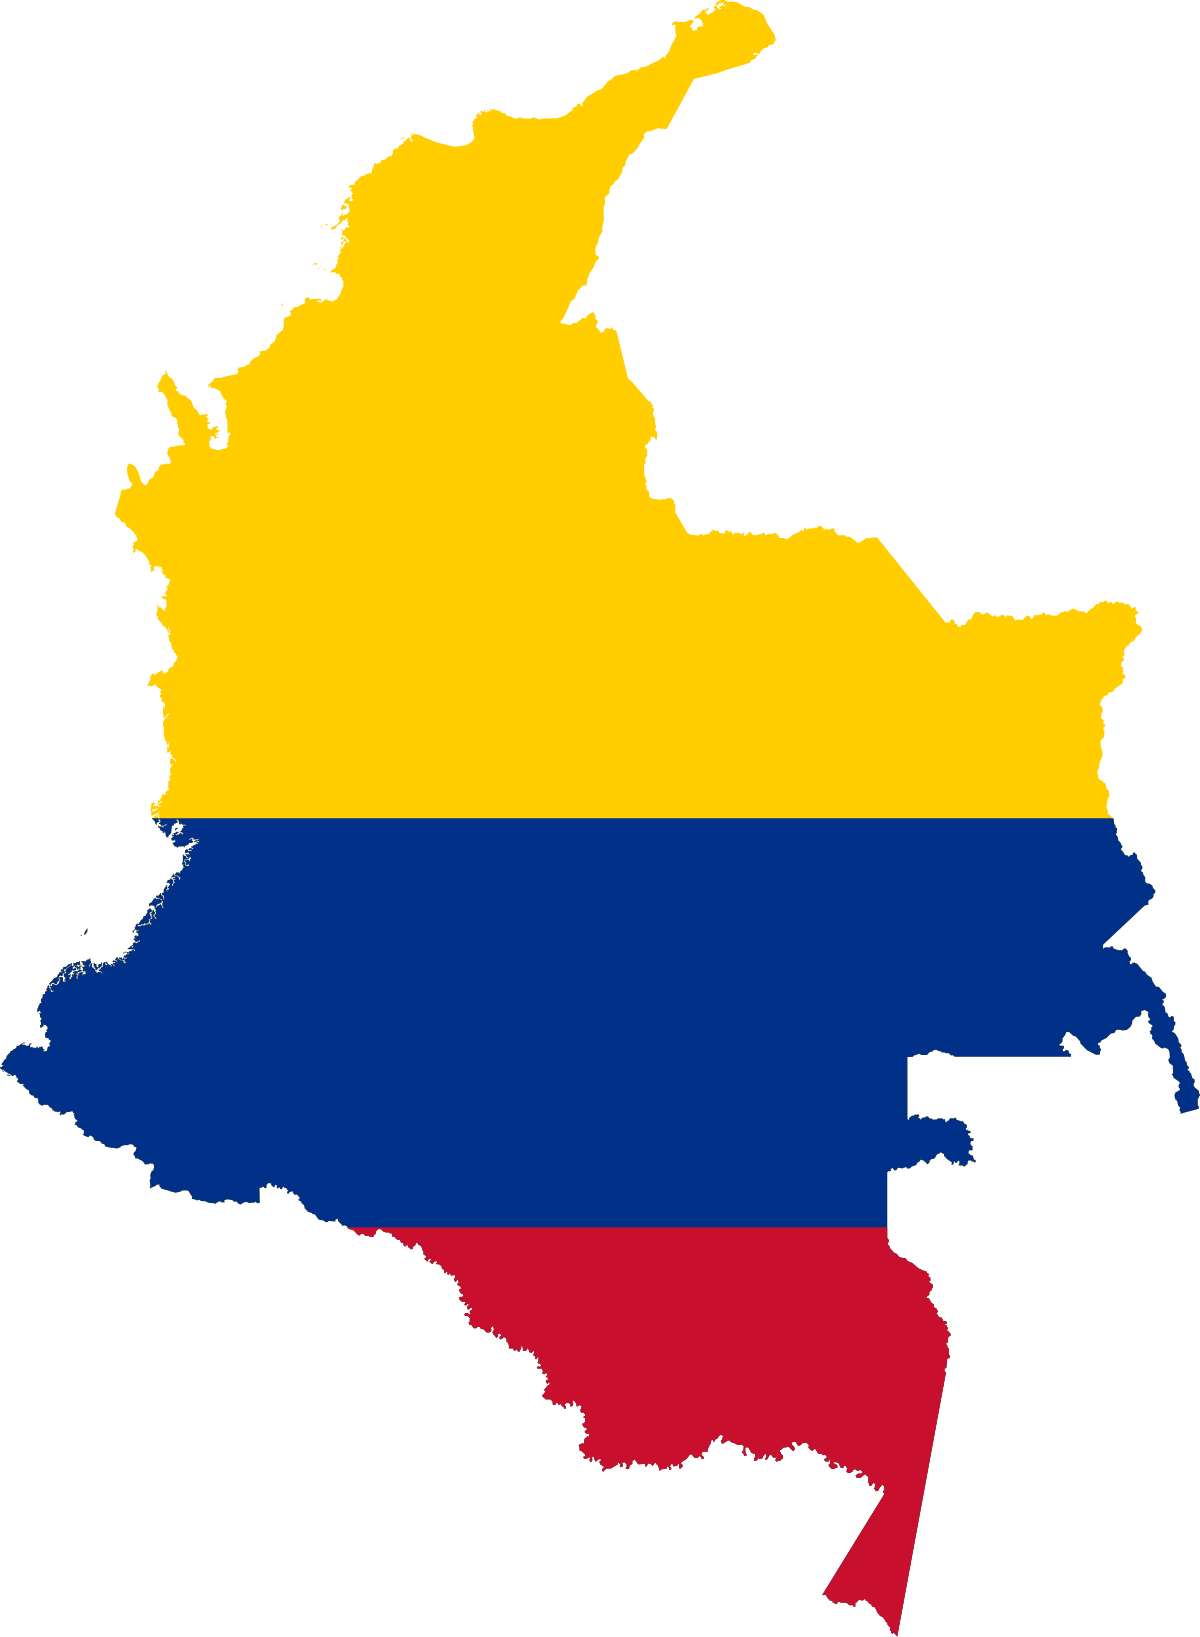 Download File:Flag-map of Colombia.svg - Wikimedia Commons